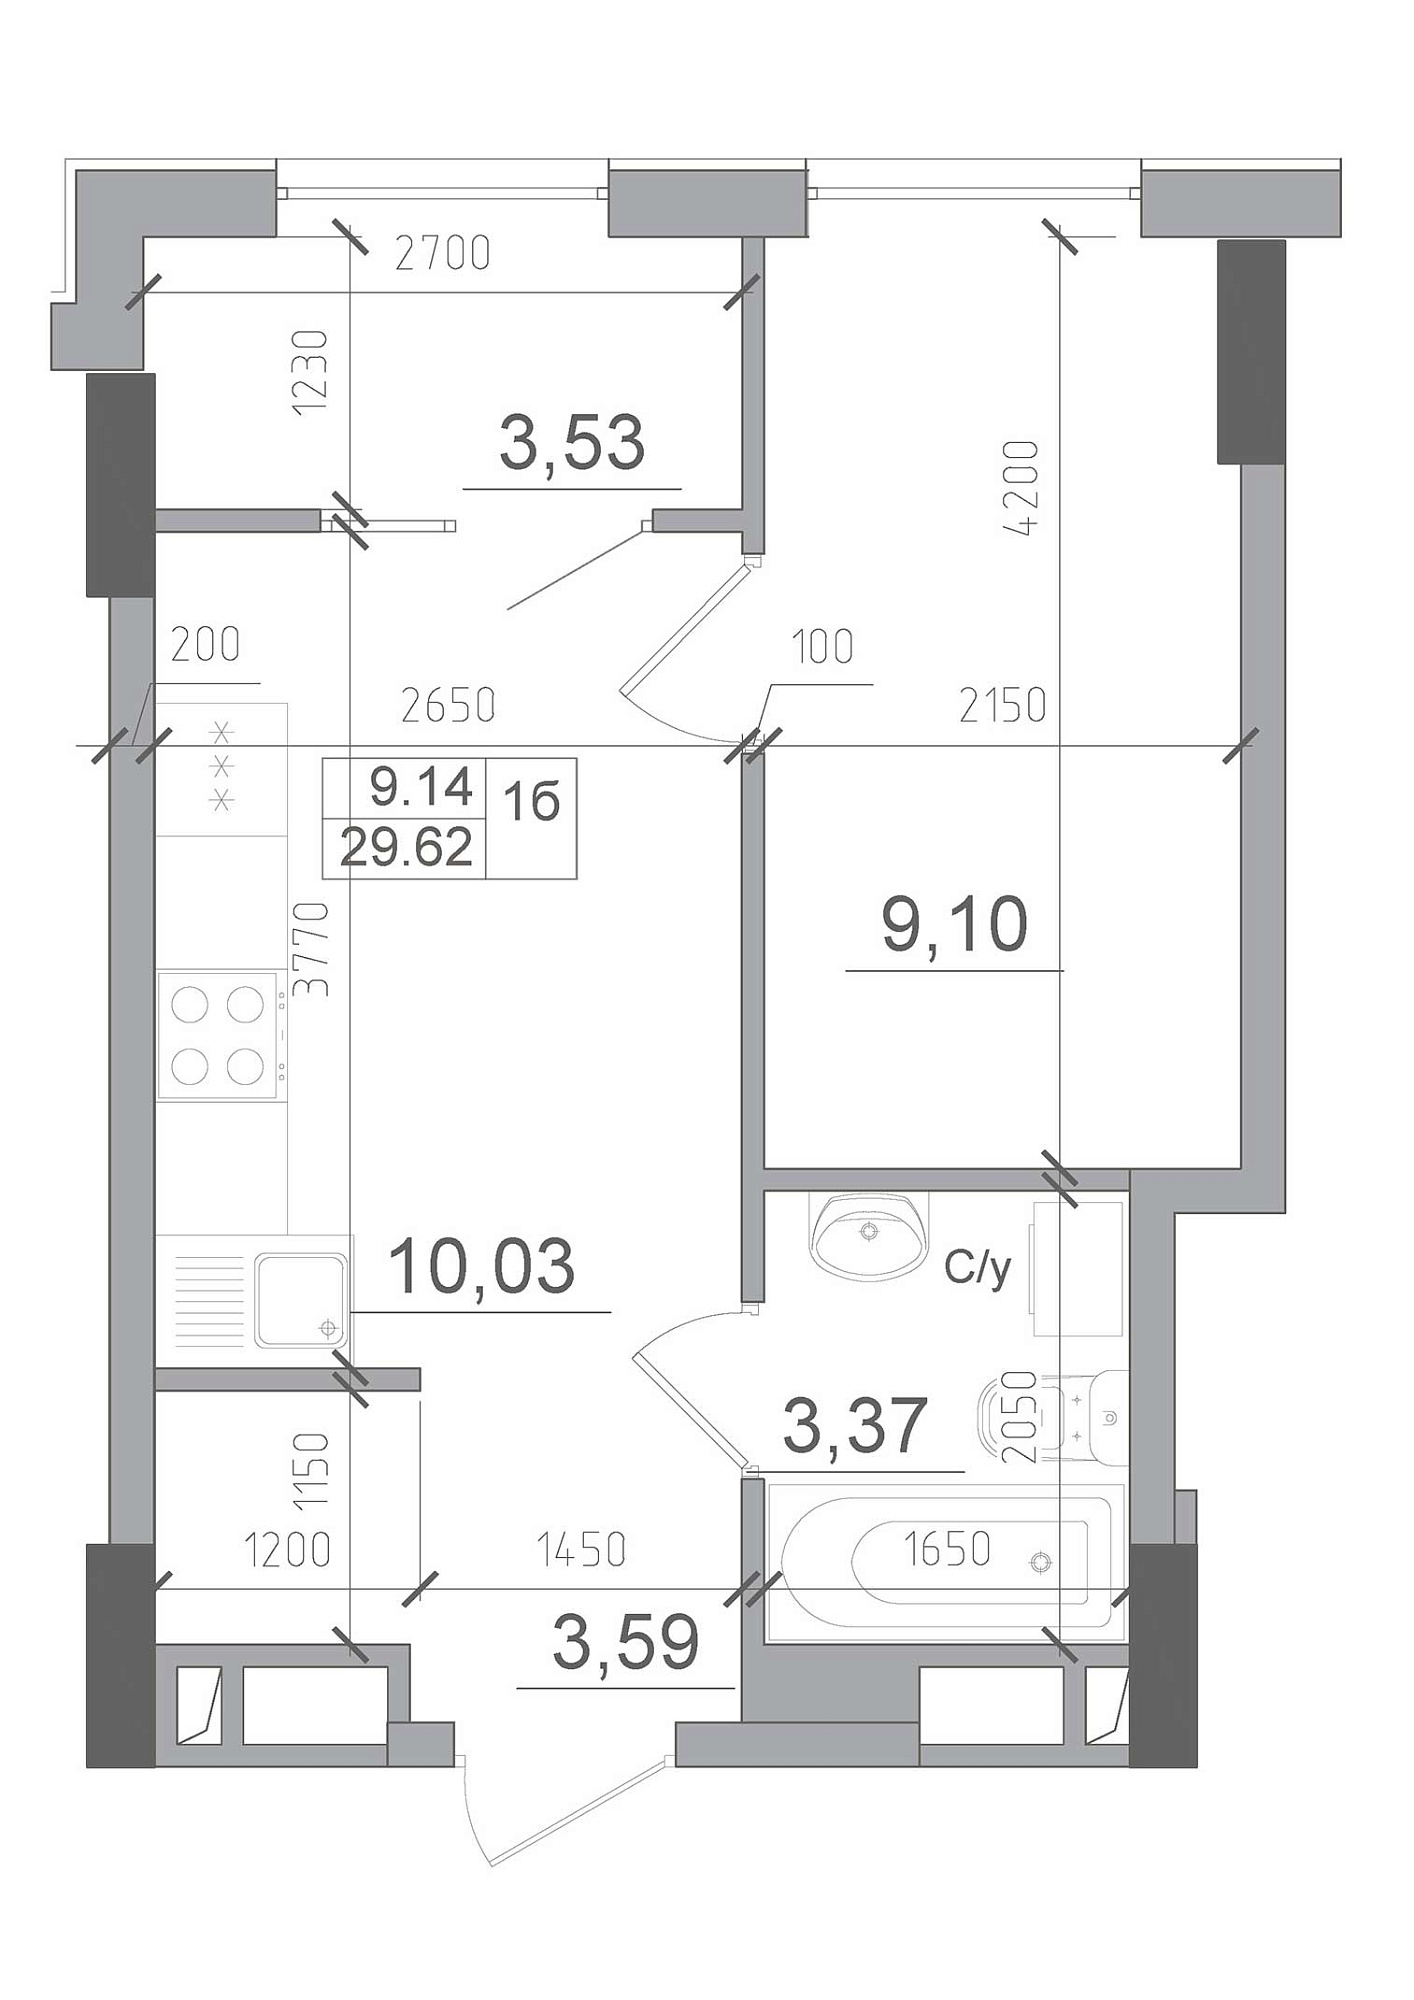 Planning 1-rm flats area 29.62m2, AB-22-01/00002.